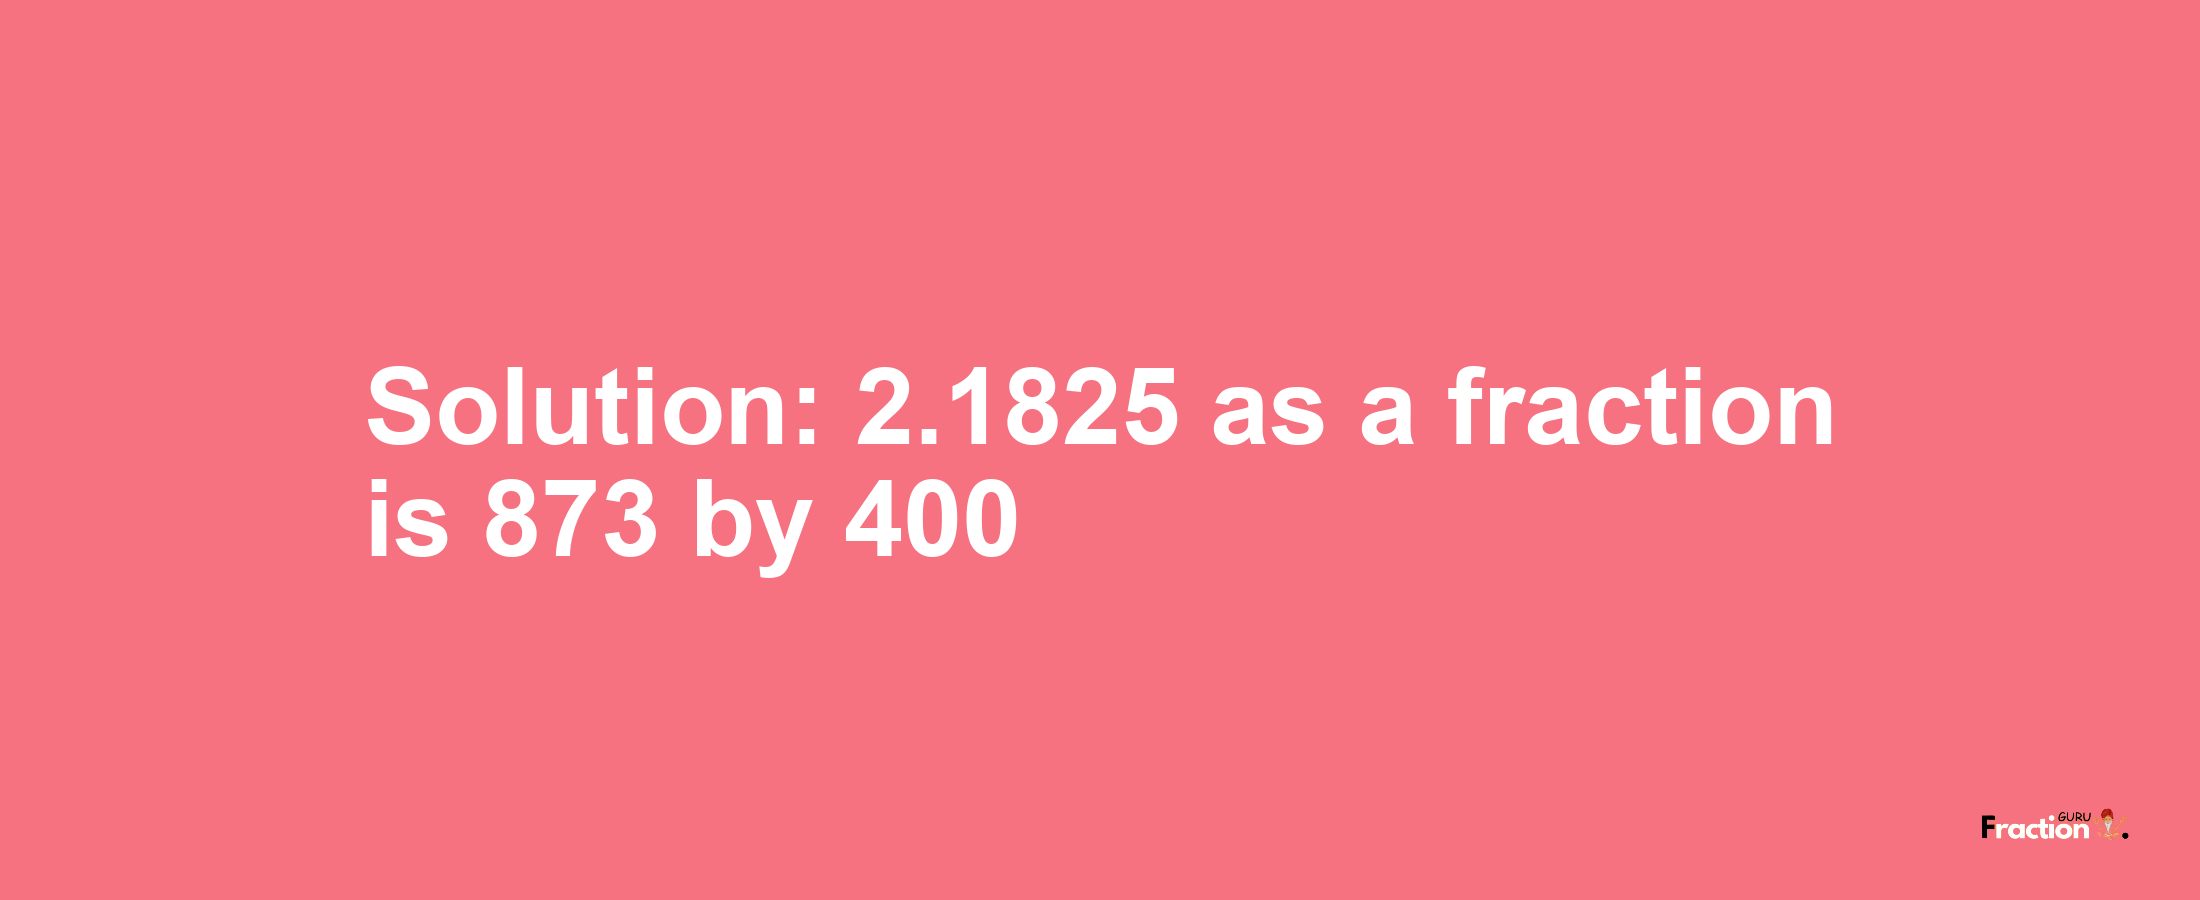 Solution:2.1825 as a fraction is 873/400